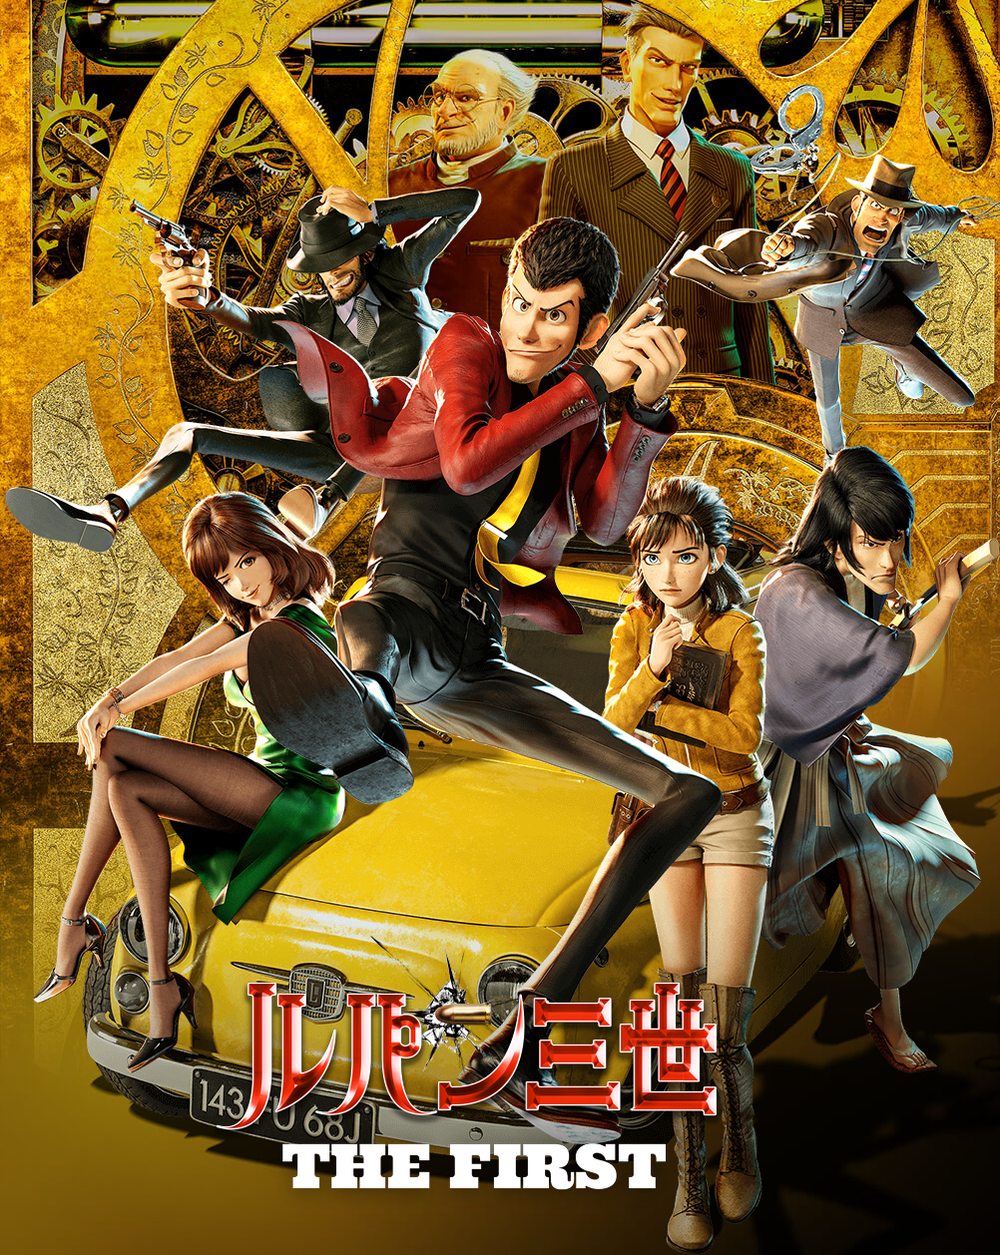 Lupin III: The First" Anime Film Available for Download in December, Steelbook Blu-Ray and DVD in January - That Hashtag Show